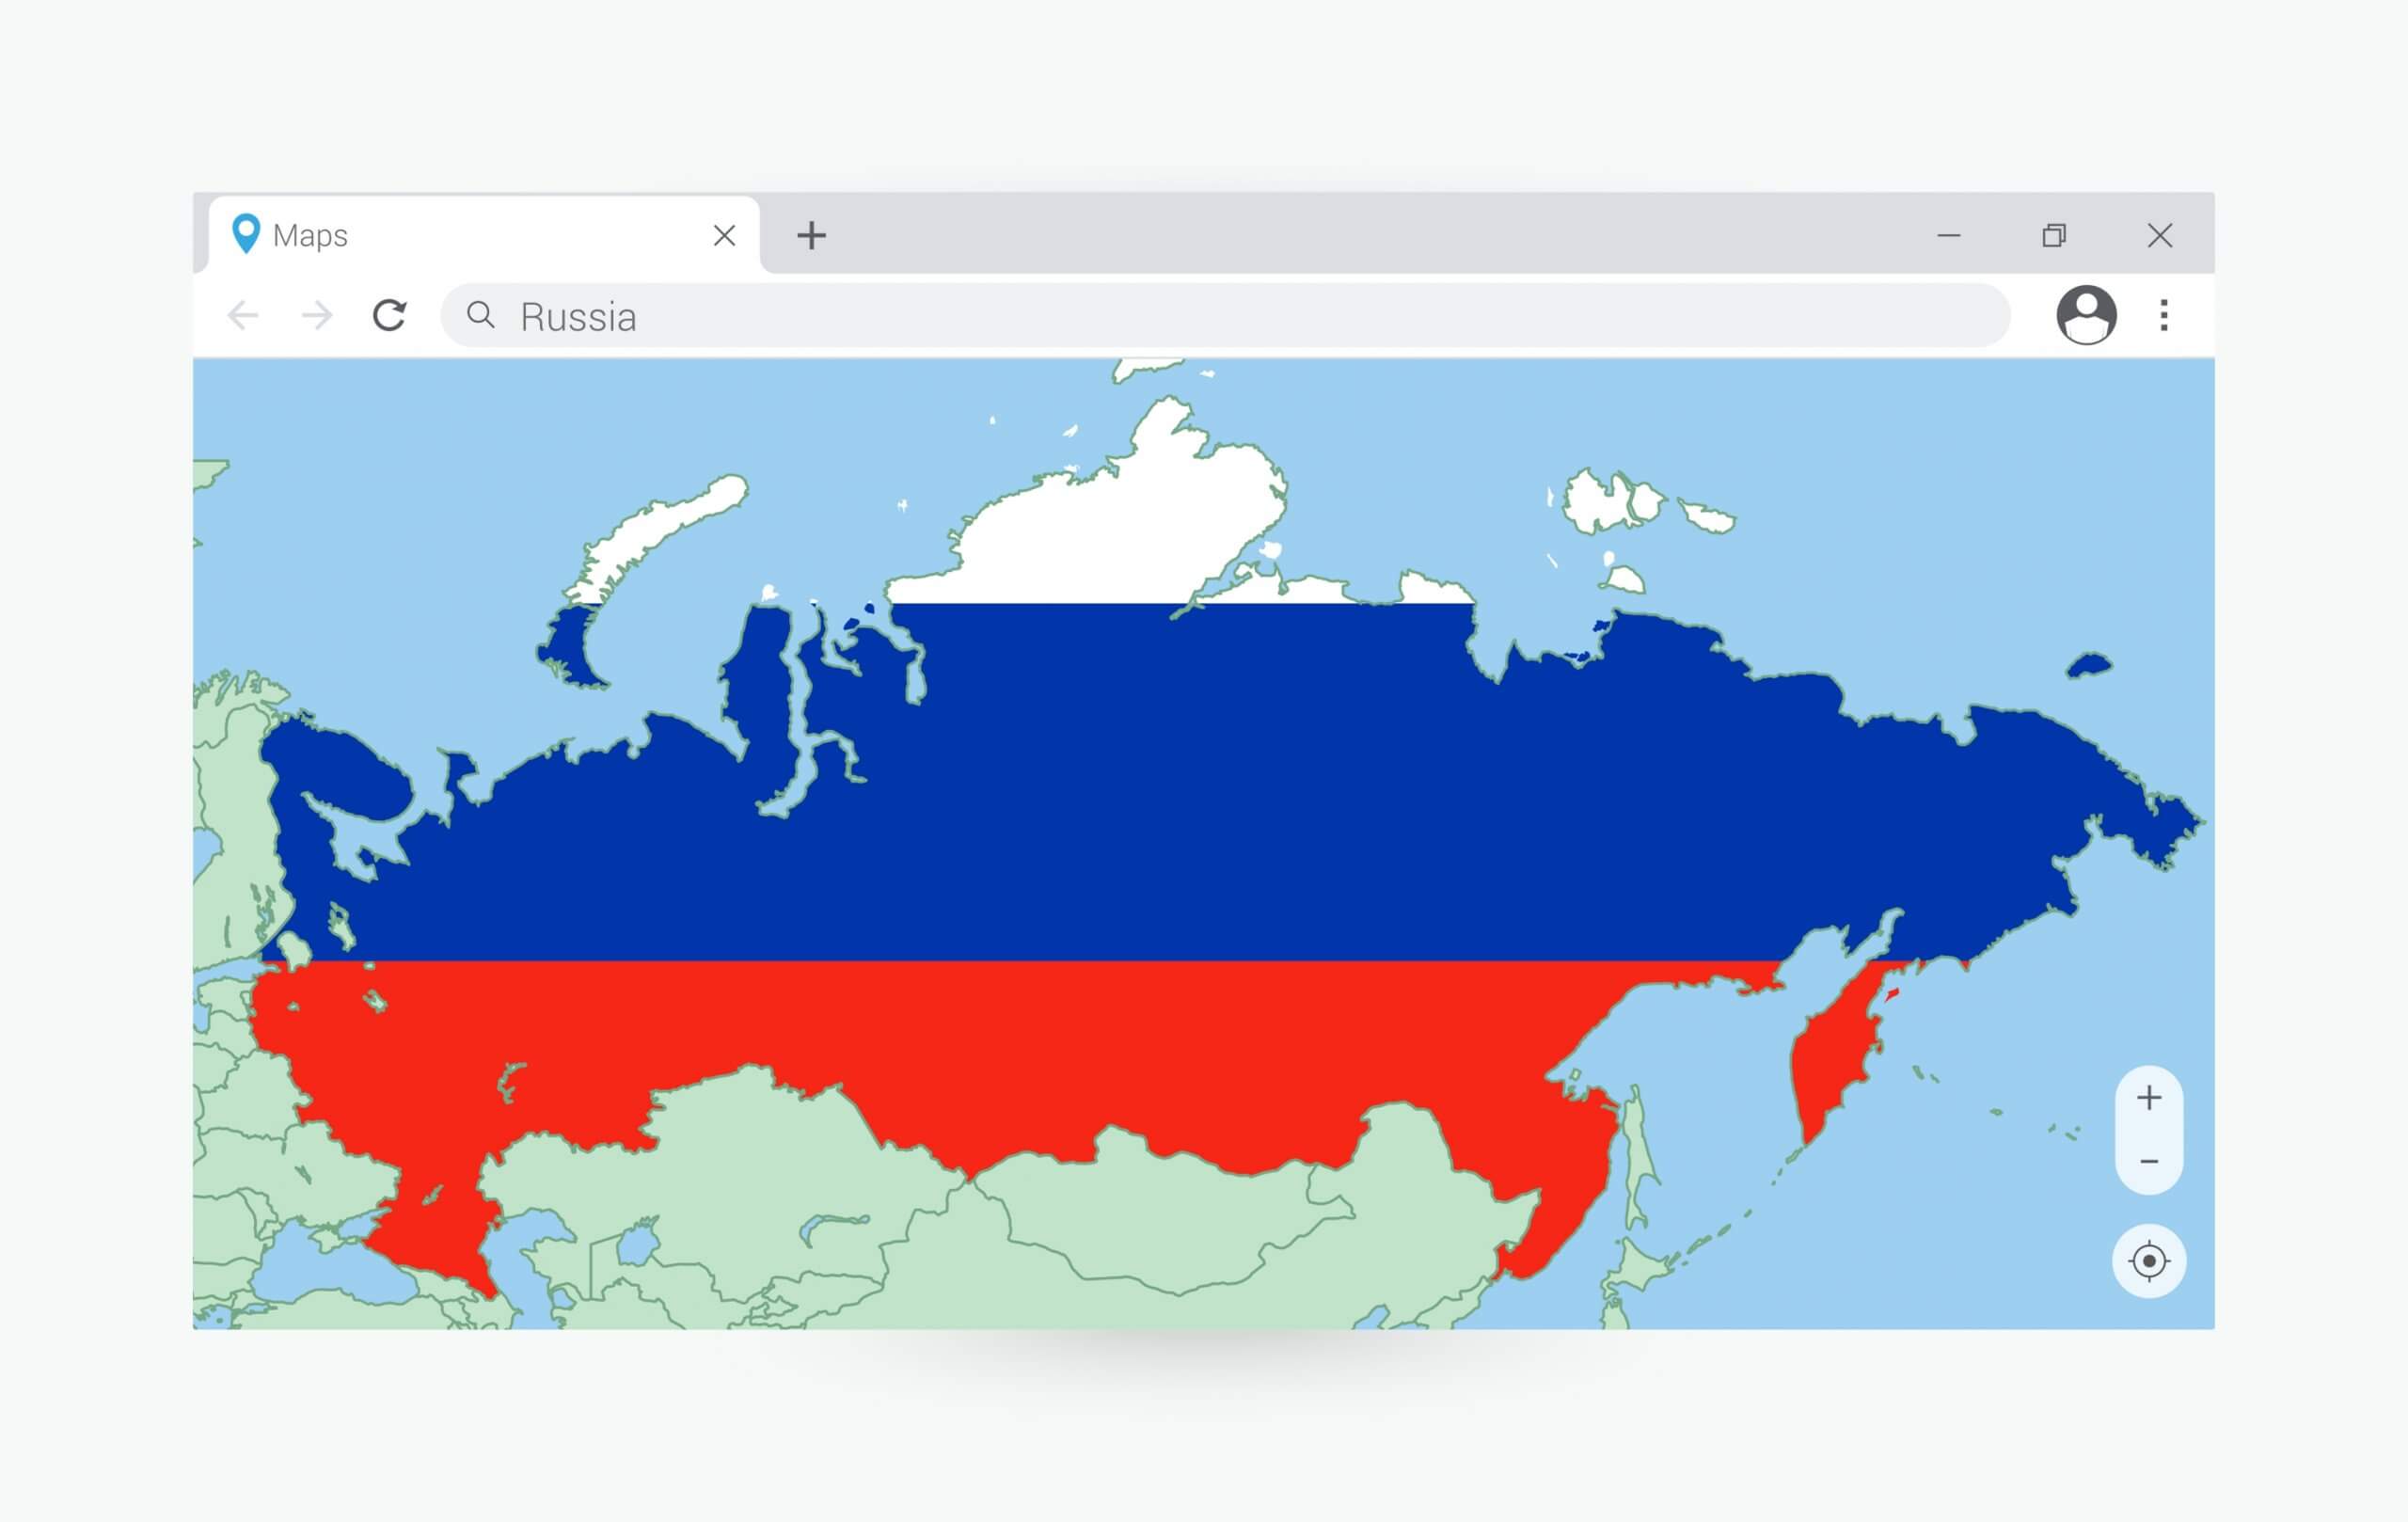 Sanctions that limit access to the internet in Russia are proving highly divisive